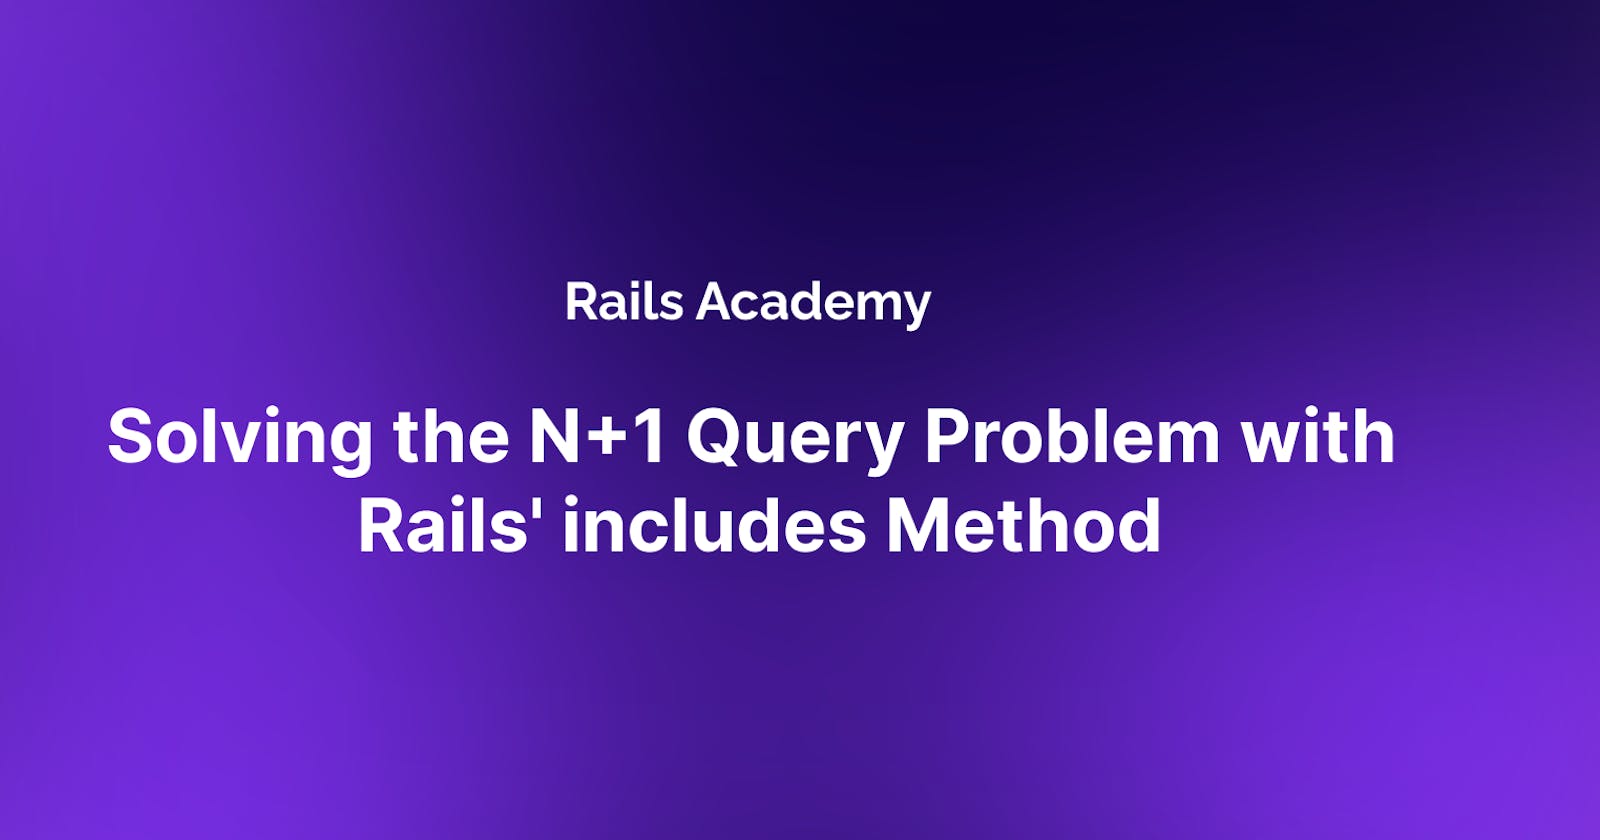 Solving the N+1 Query Problem with Rails' includes Method